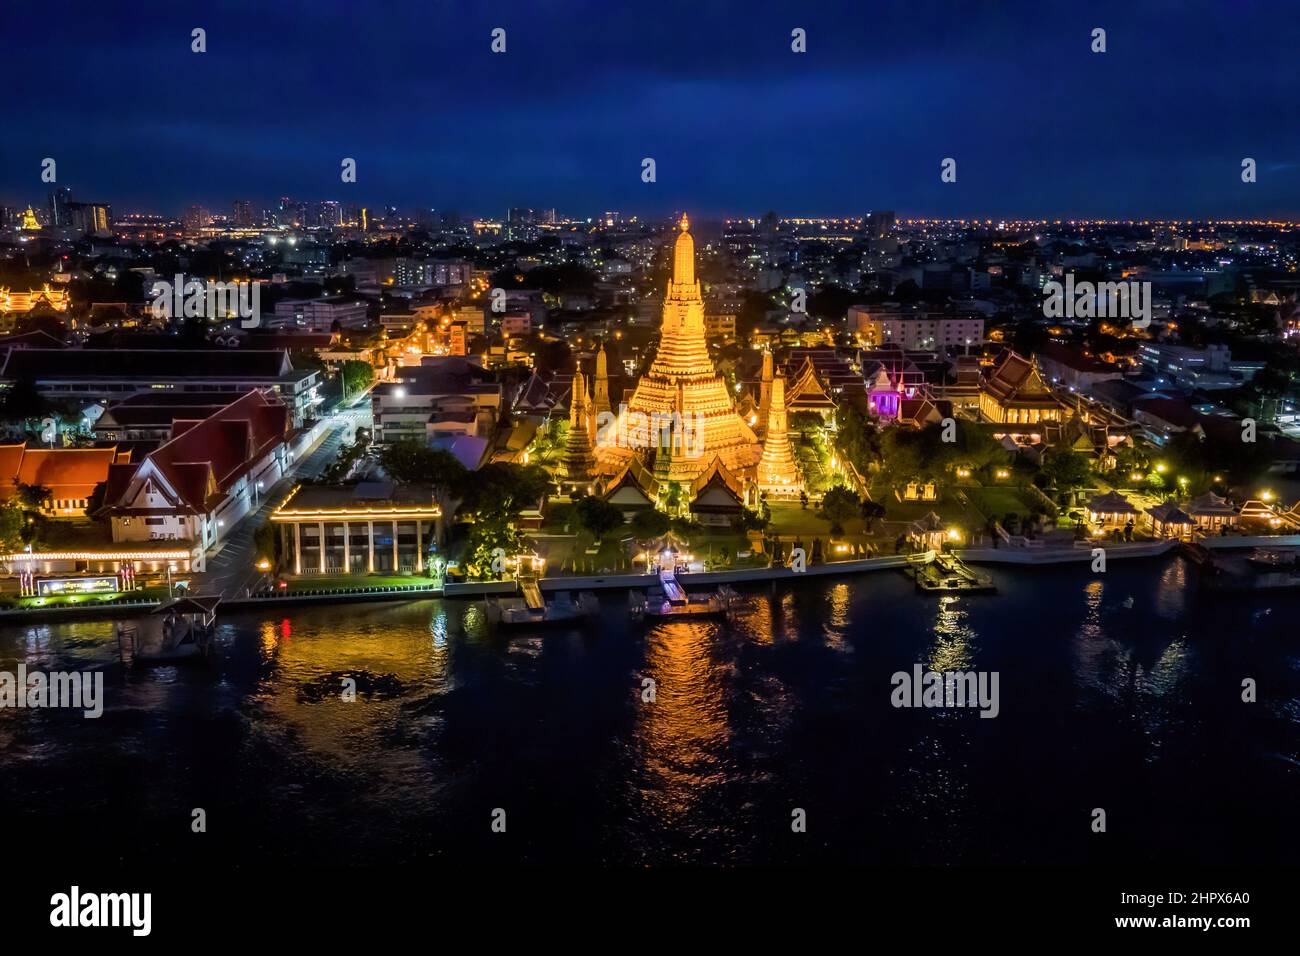 (EDITOR'S NOTE: Image taken with drone)Aerial view of Wat Arun, The Temple of Dawn, in Bangkok. Two of Thailand's most famous cultural heritage sites and tourist attractions, Wat Arun (Temple of Dawn) and The Grand Palace, are illuminated at night along the Chao Praya River in Bangkok. The Thai Government recently announced eased entry requirements for international tourists visiting Thailand amidst a surge in the Omicron variant of COVID-19 throughout the country, with cases topping 20,000 reported infections per day. (Photo by Matt Hunt/SOPA Images/Sipa USA) Stock Photo